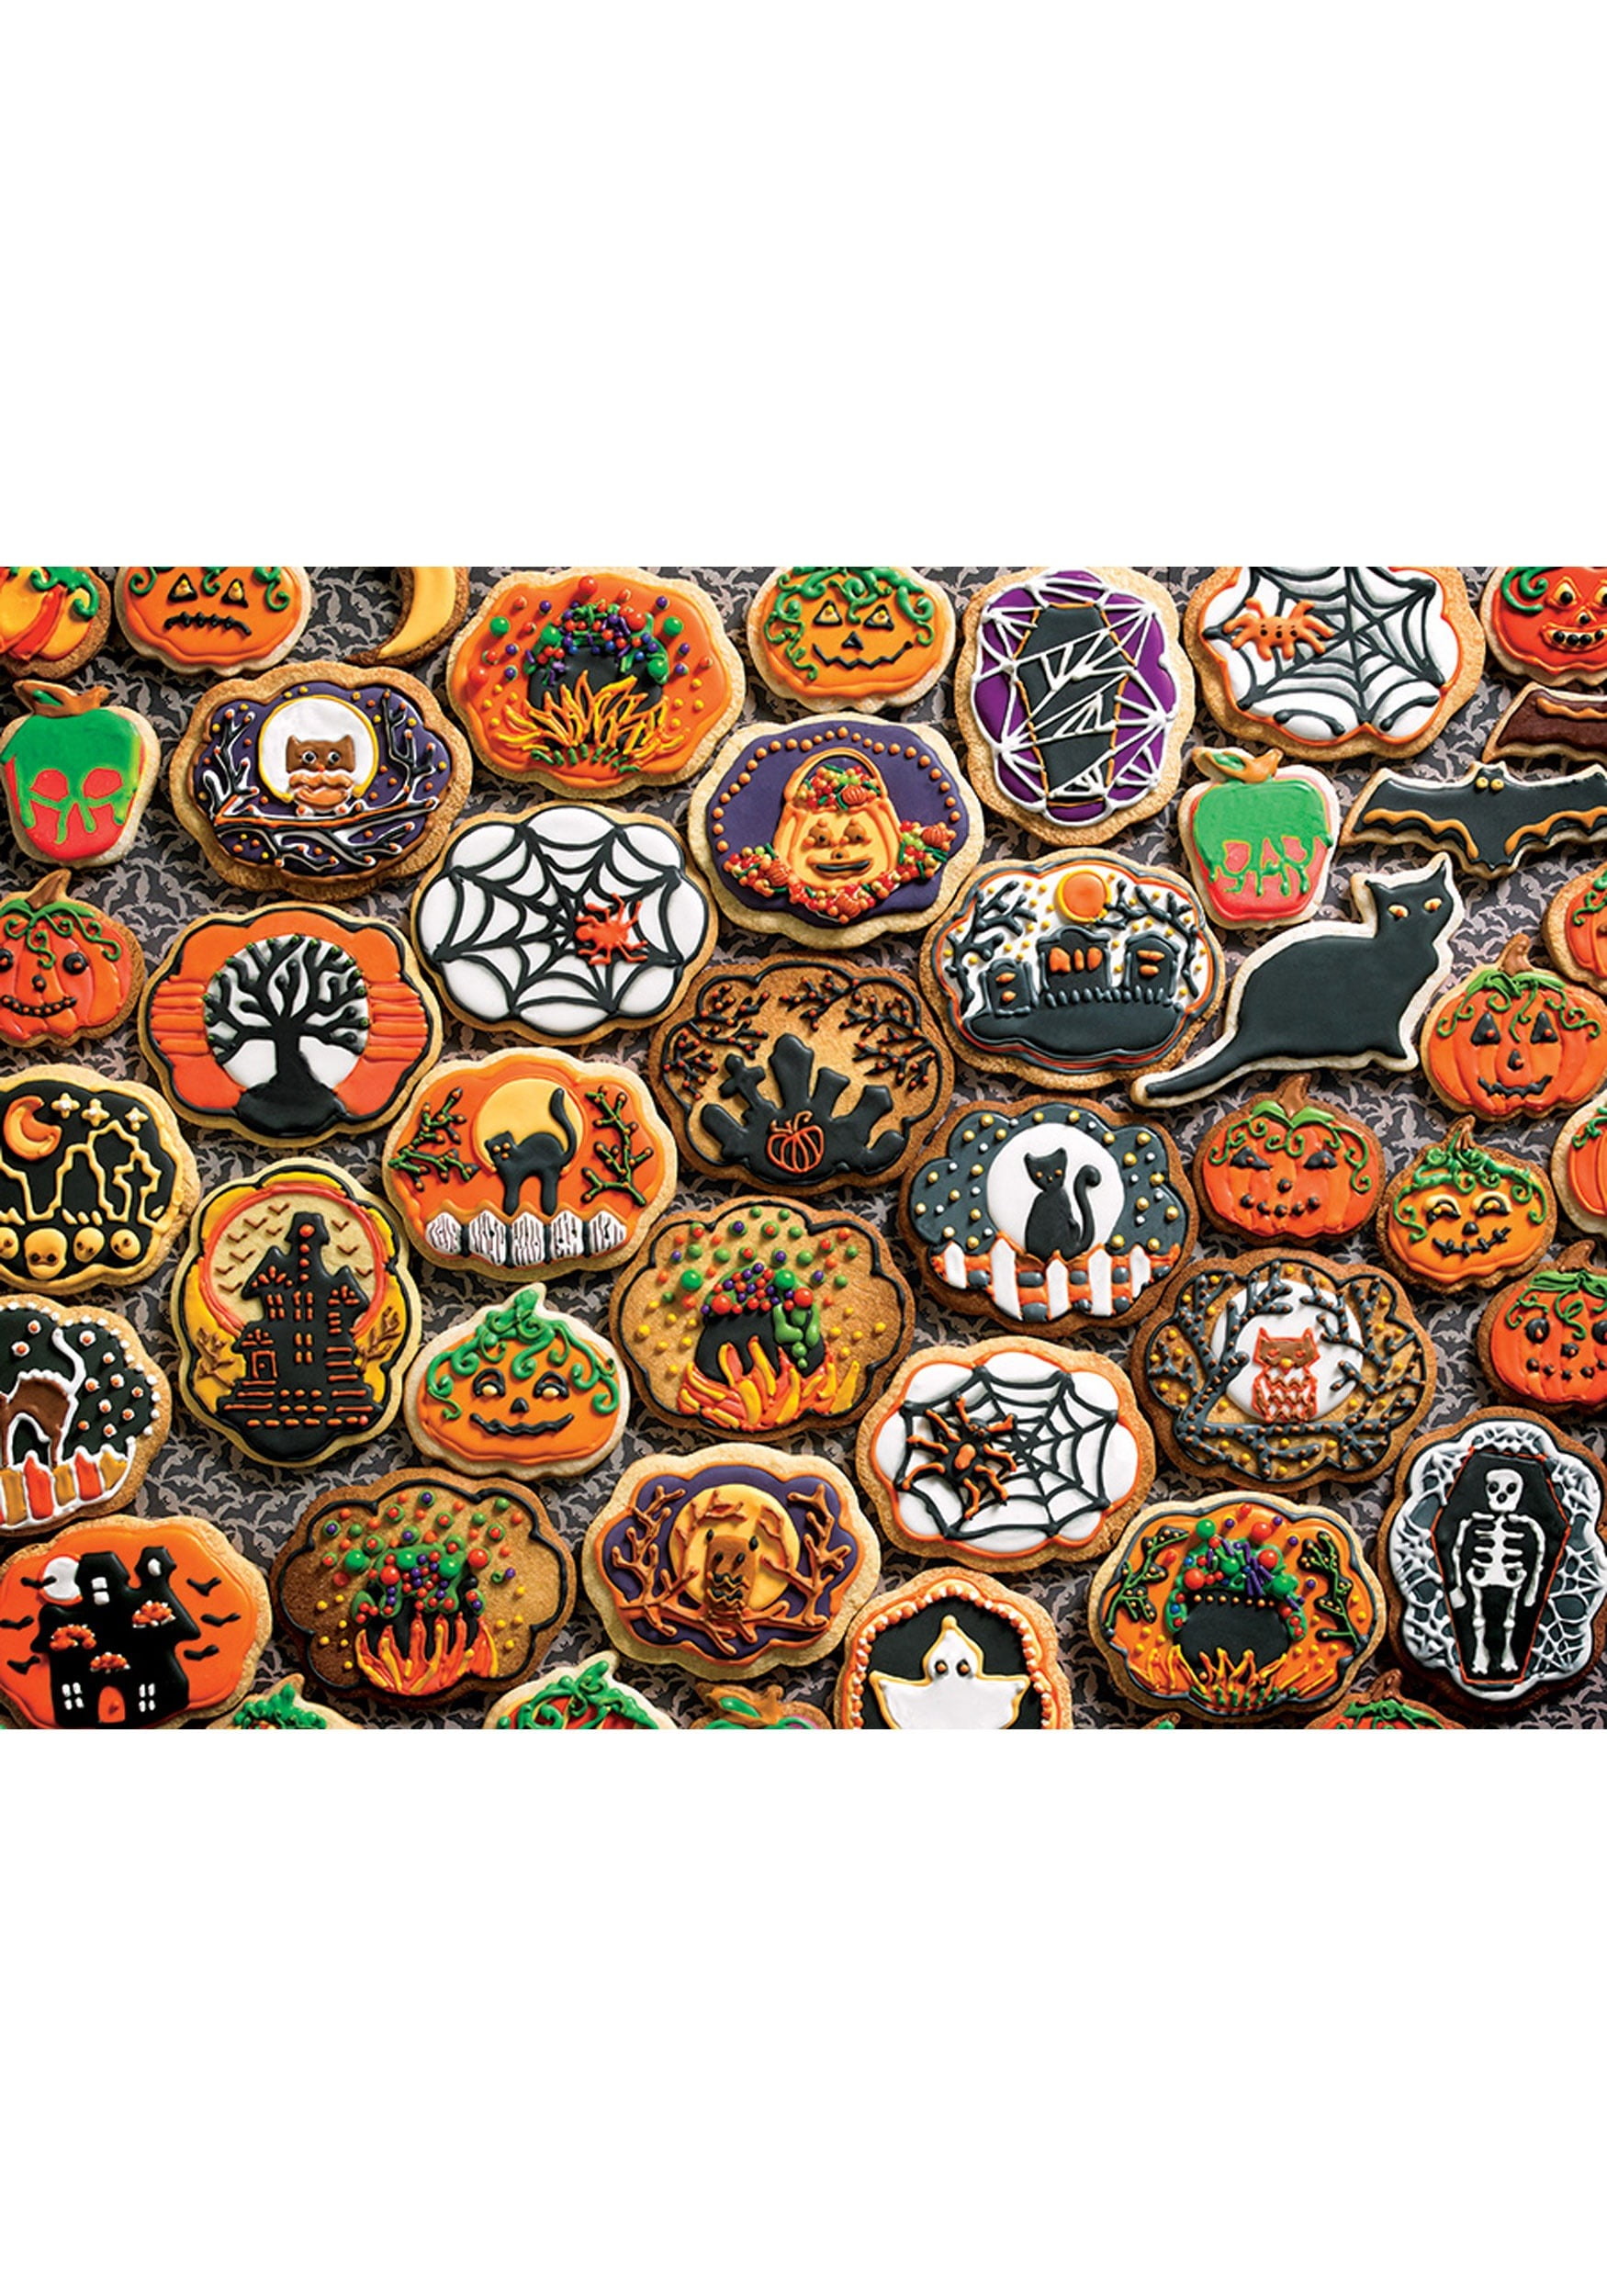 Spooky Halloween Pumpkins and Haunted Mansion 504 Piece Jigsaw Puzzle 16" X 20 for sale online 